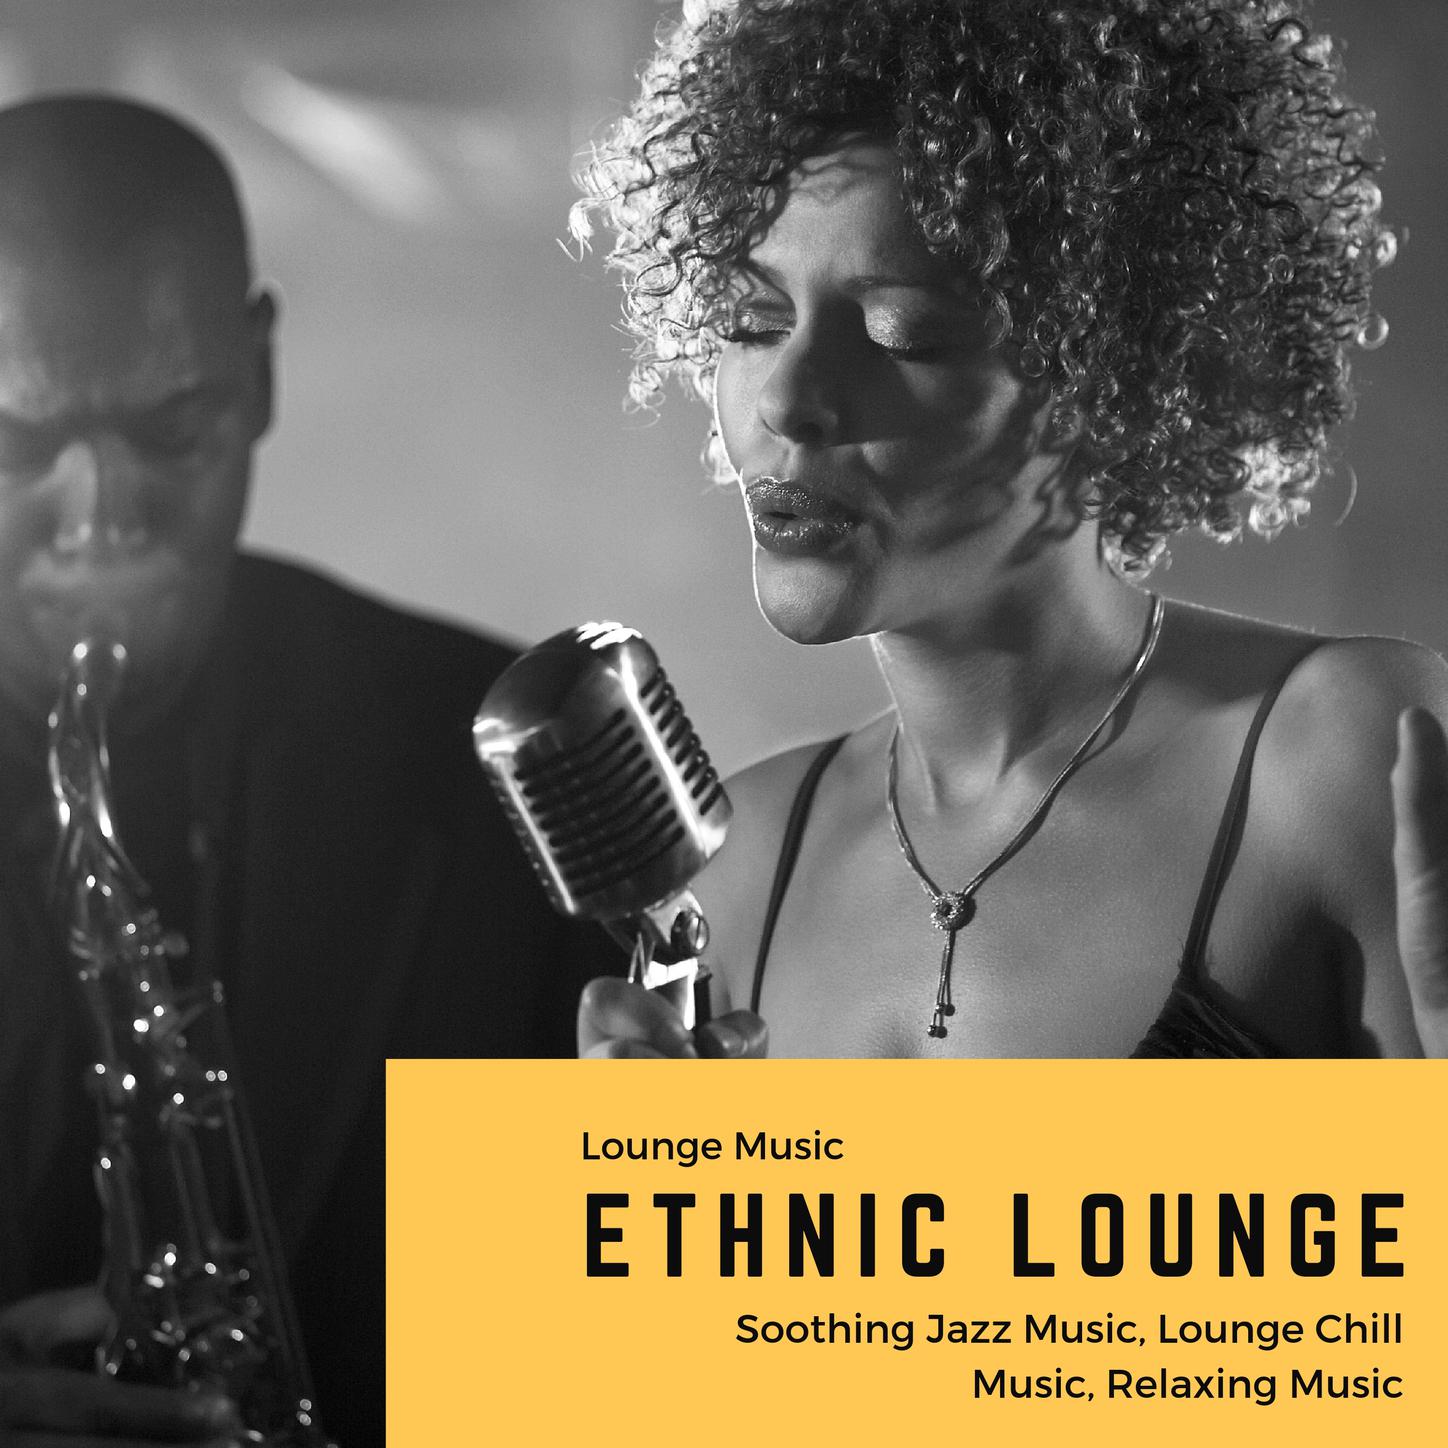 Ethnic Lounge (Lounge Music, Soothing Jazz Music, Lounge Chill Music, Relaxing Music)